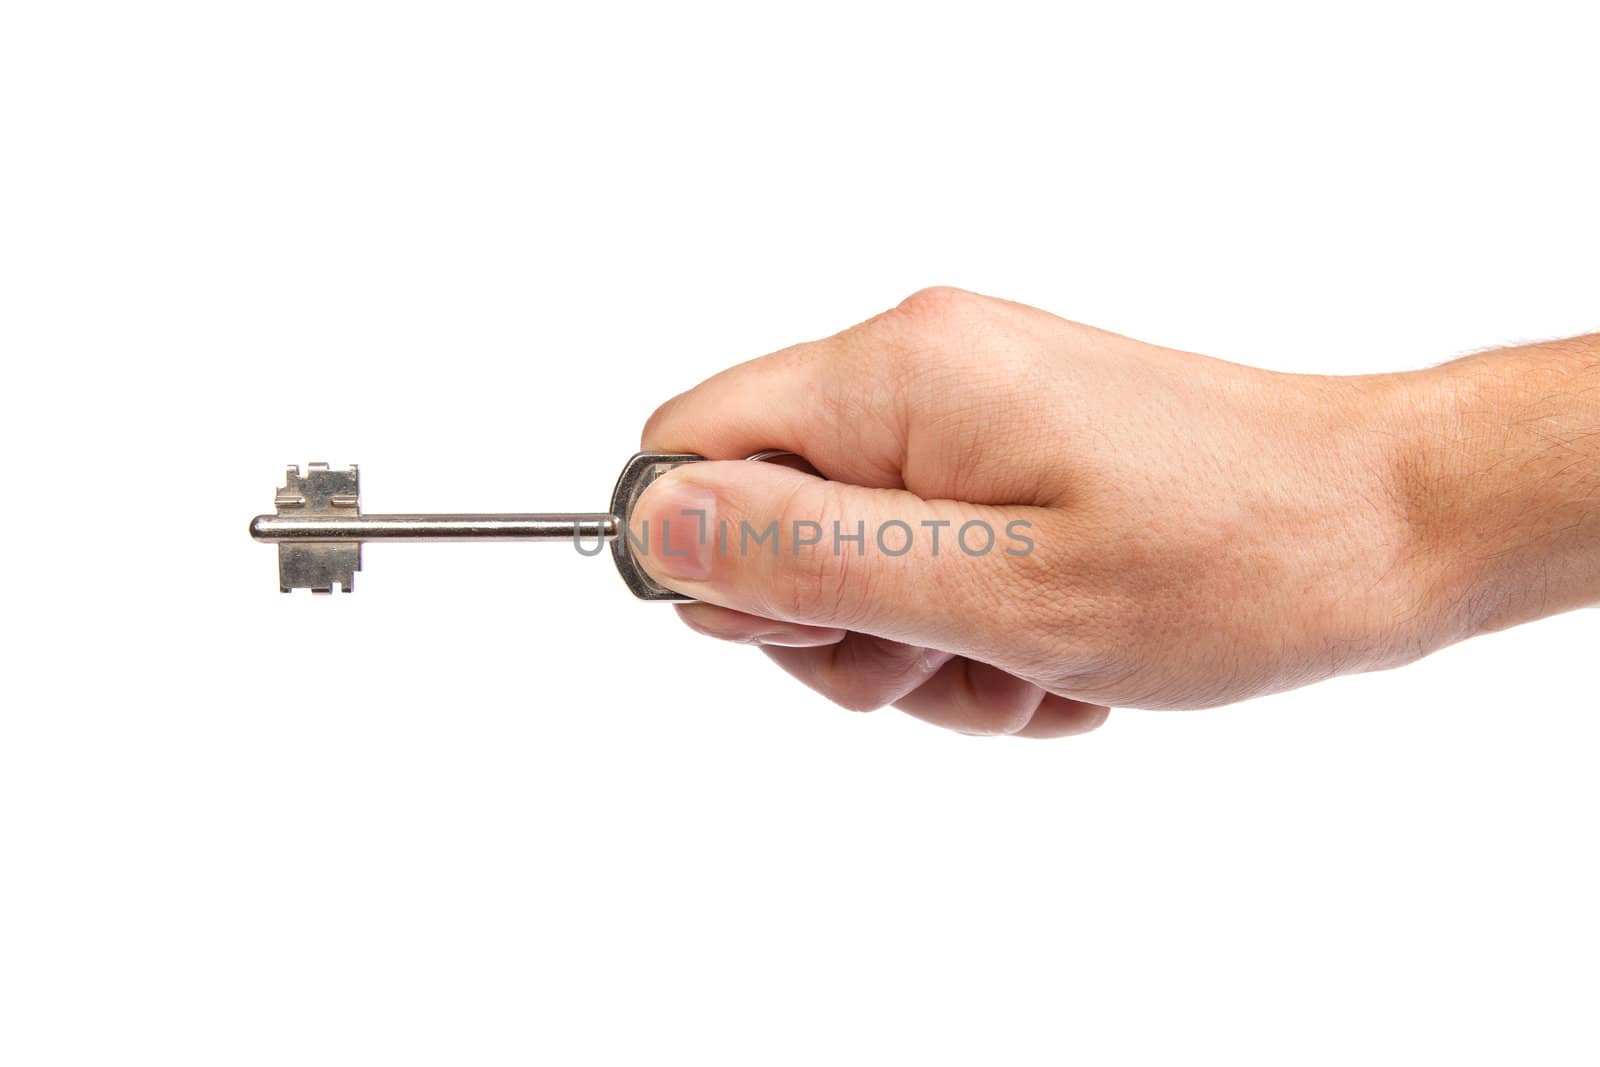 Male hand holding a key to the house, image is taken over a white background.